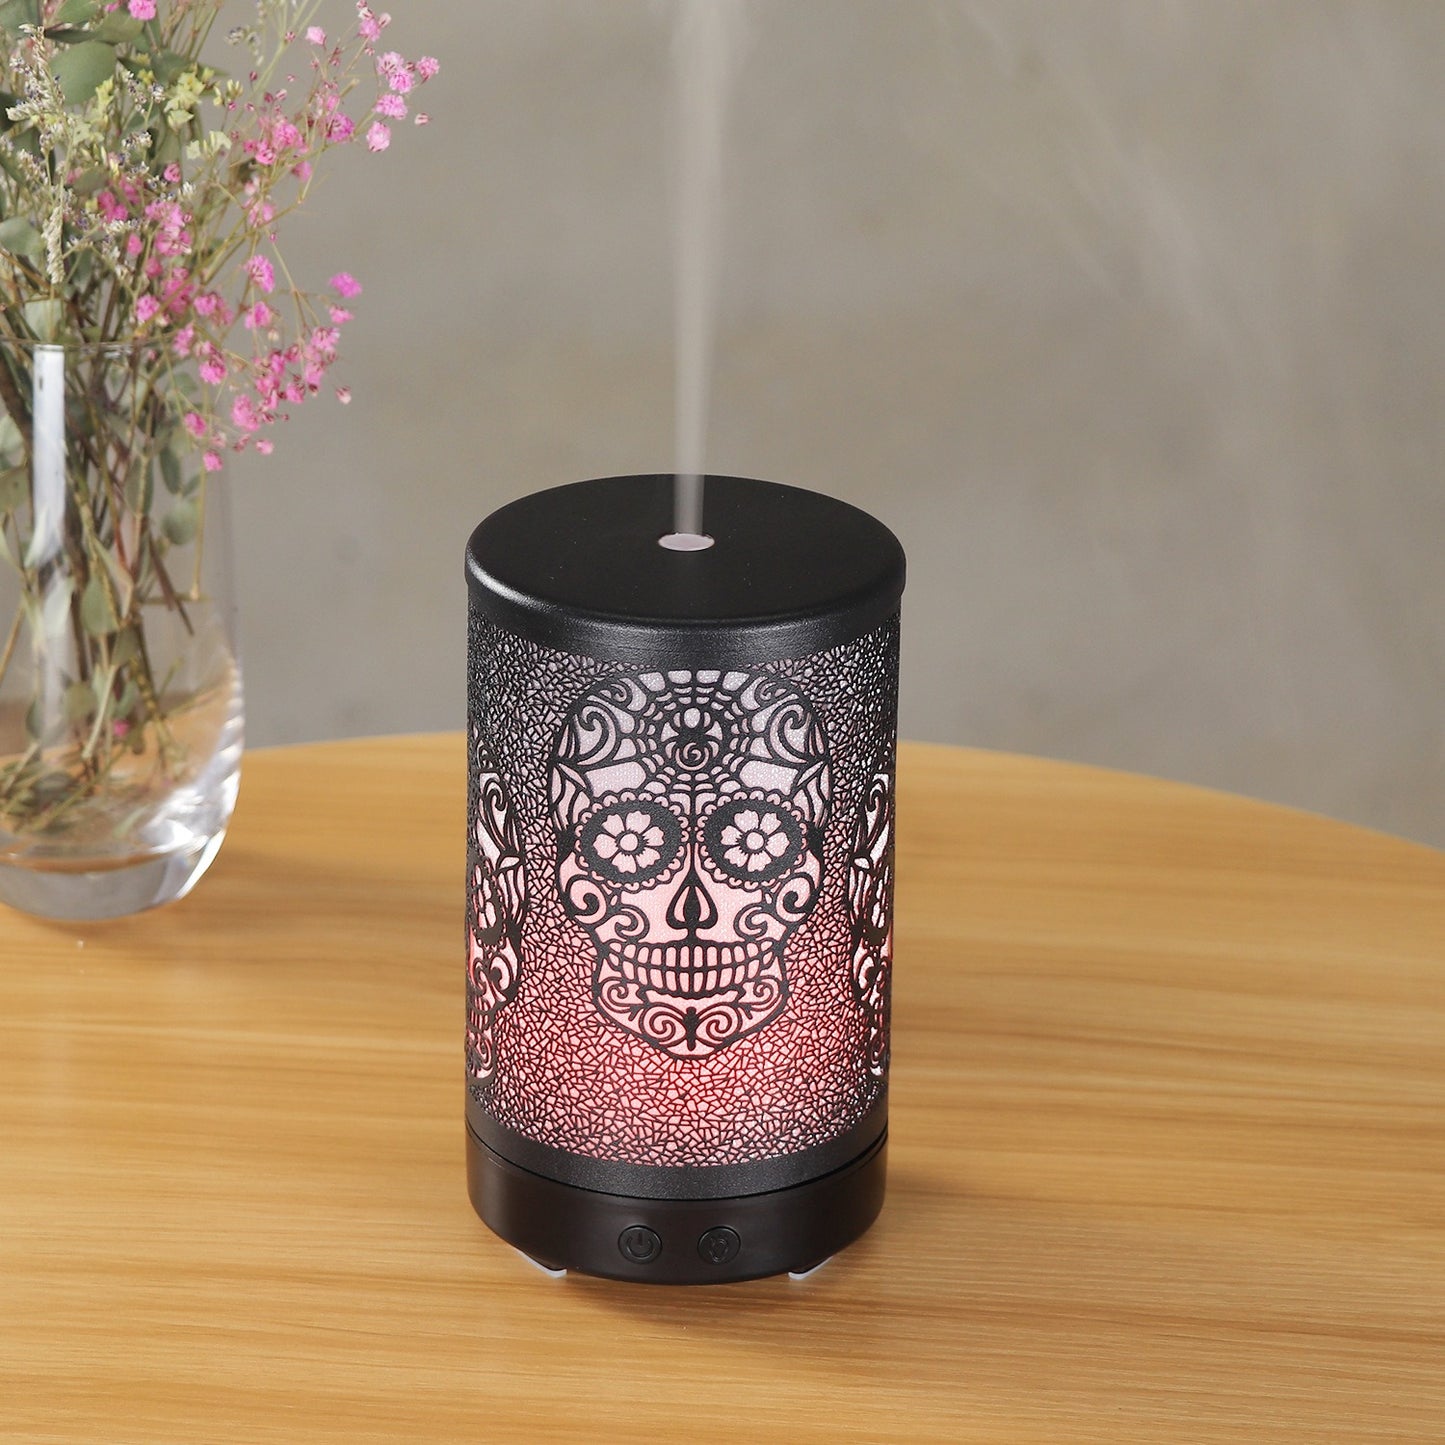 100ml Ultrasonic Electric Skull Aroma Diffuser With Remote